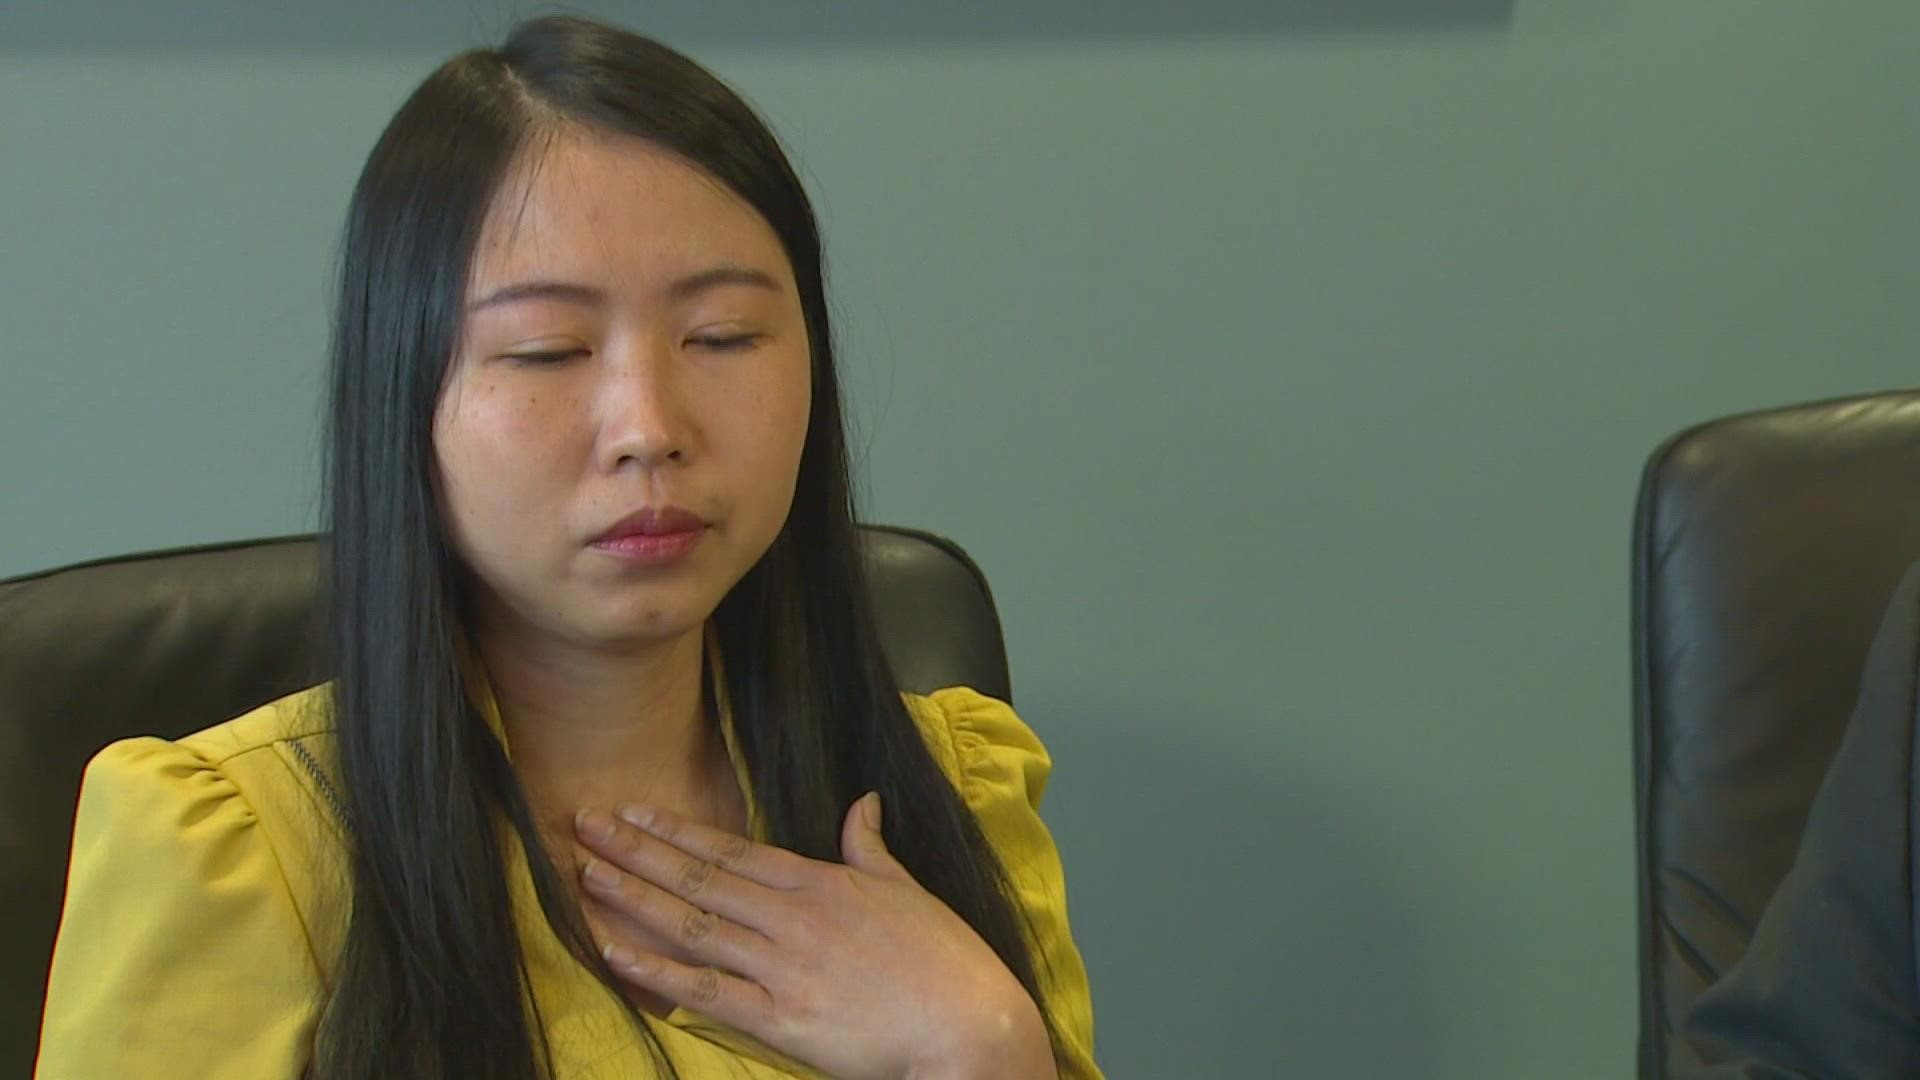 An Asian American woman says she caught a threat against her life on video and is now suing her neighbor for $100,000 in emotional damages.